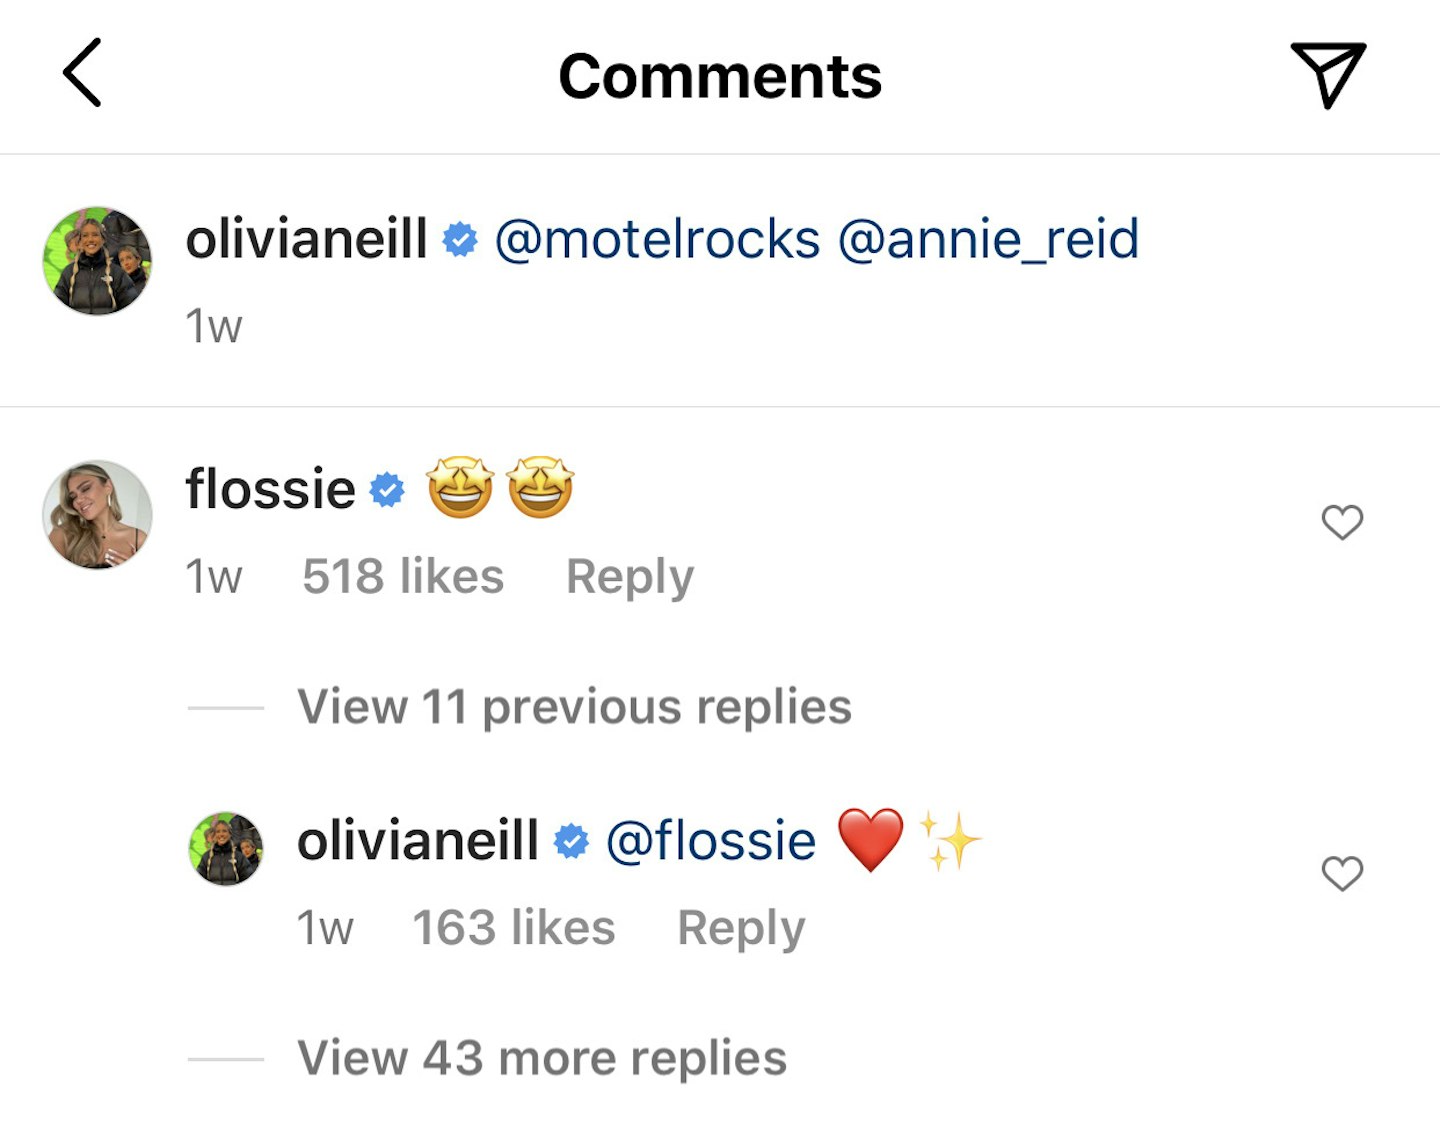 why are flossie and olivia neill not friends anymore